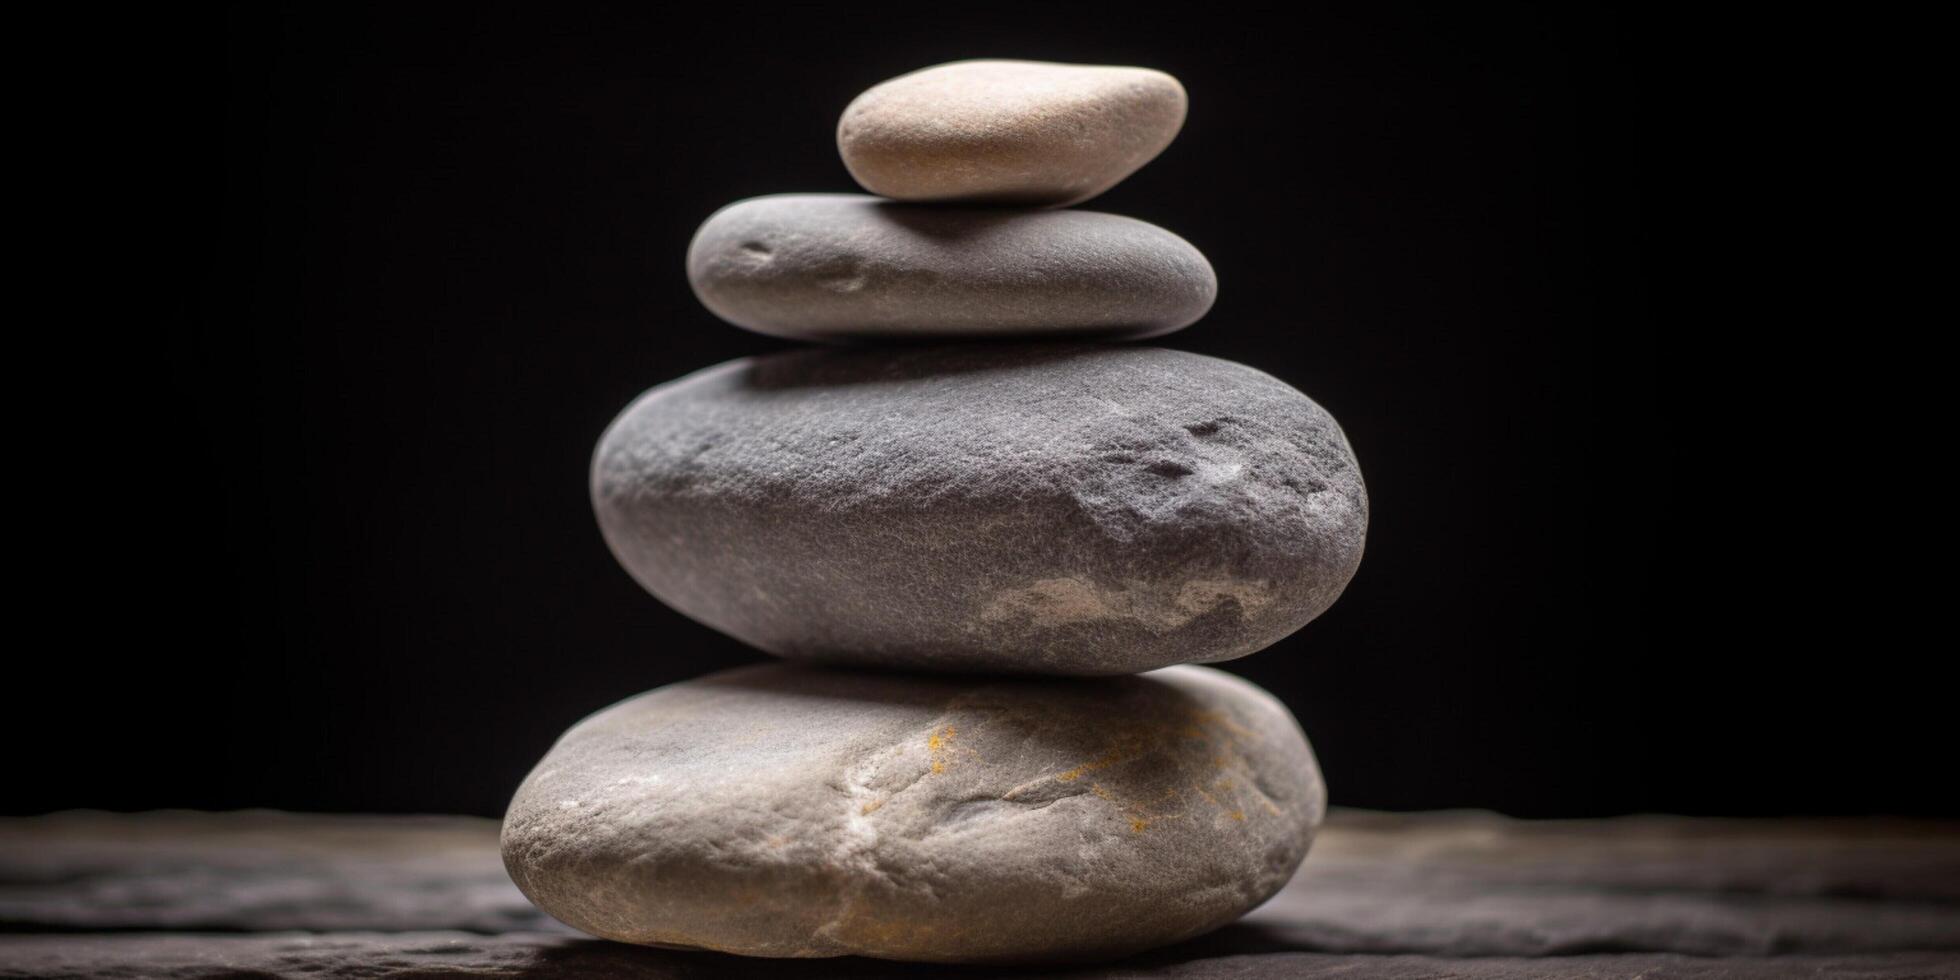 Stack of rock zen stone with background photo